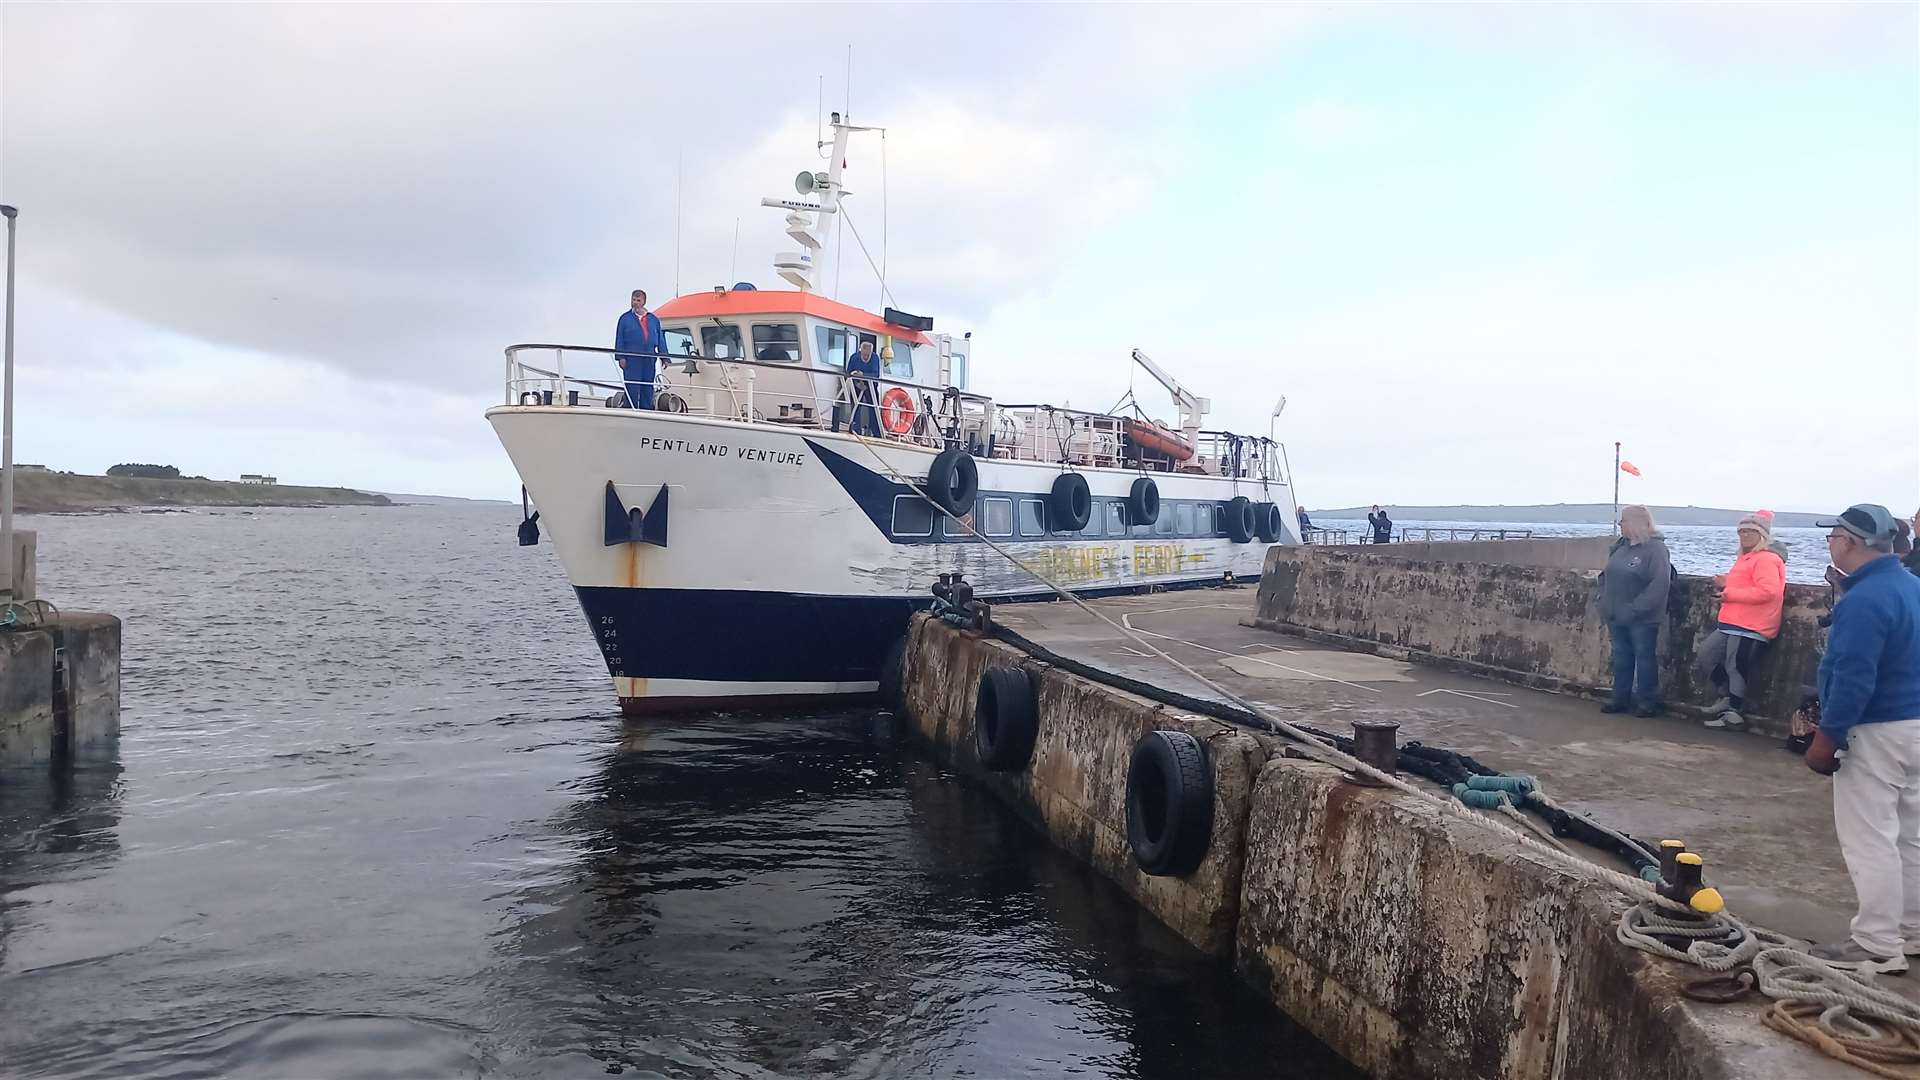 Derek Bremner sent this photograph as he waited to embark on the final journey with John O'Groats Ferries on the Pentland Venture in the autumn.